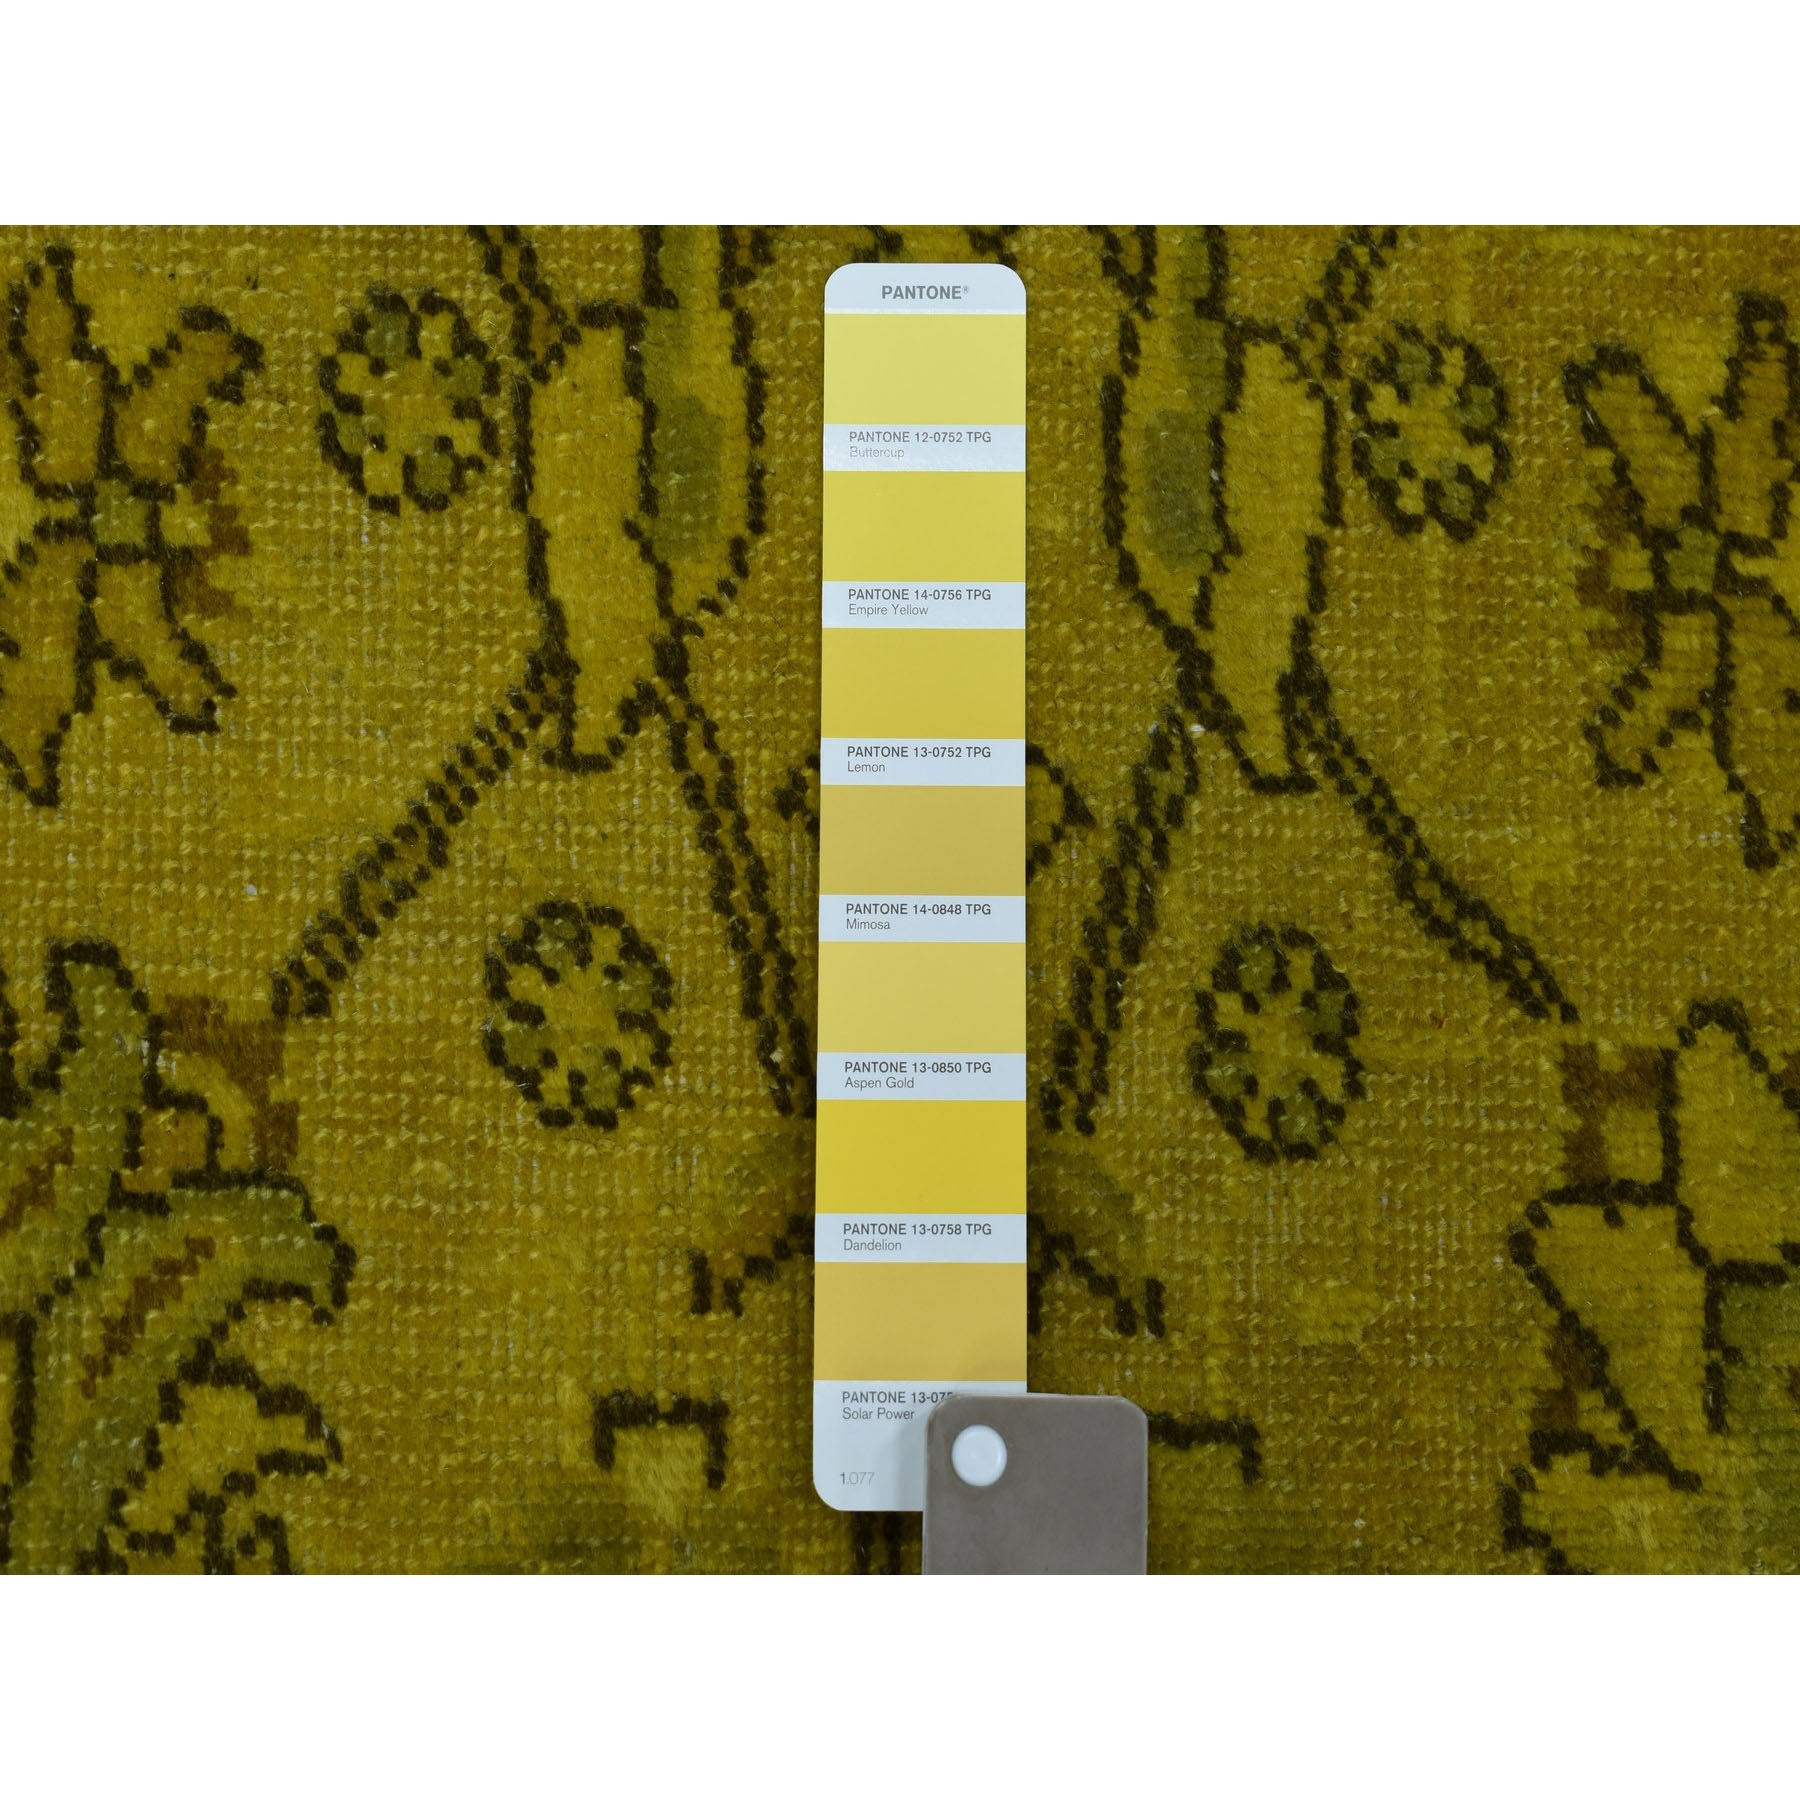 9-7 x12-2  Yellow Vintage Persian Worn Pile Hand Knotted Oriental Rug 